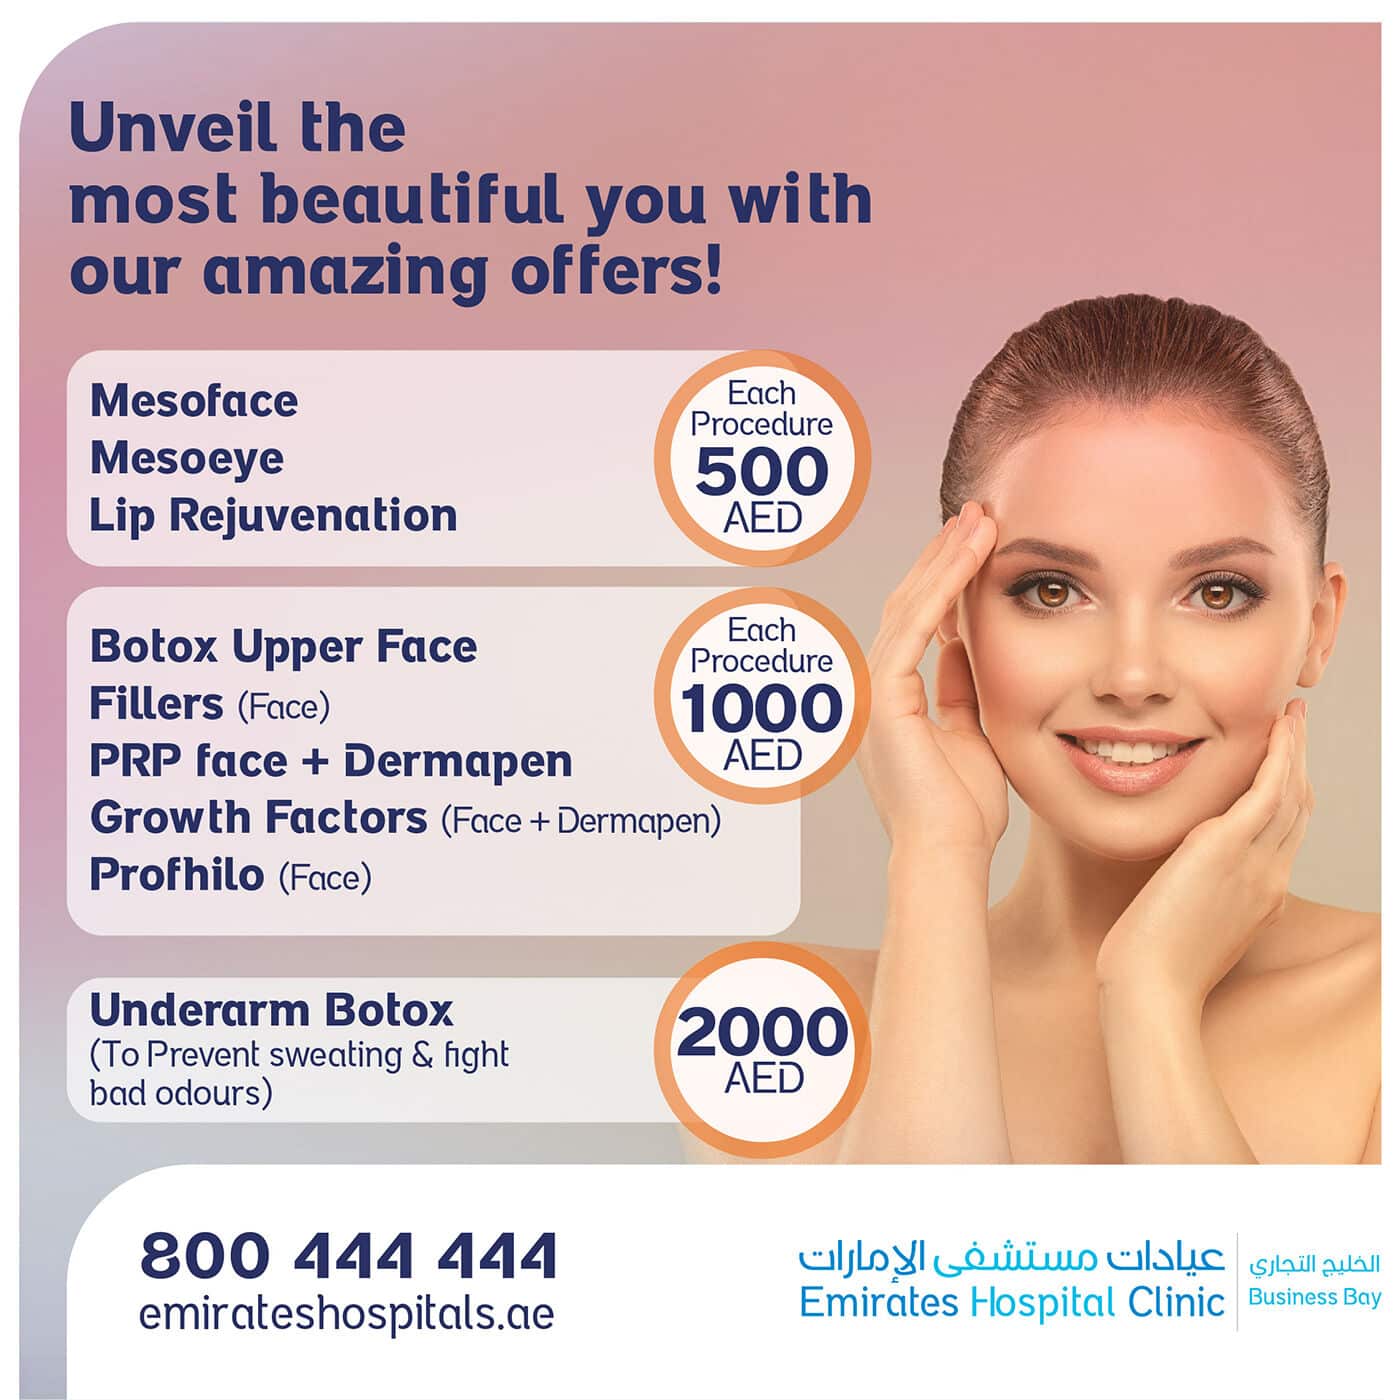 Special Offers on Dermatology Procedures 2022